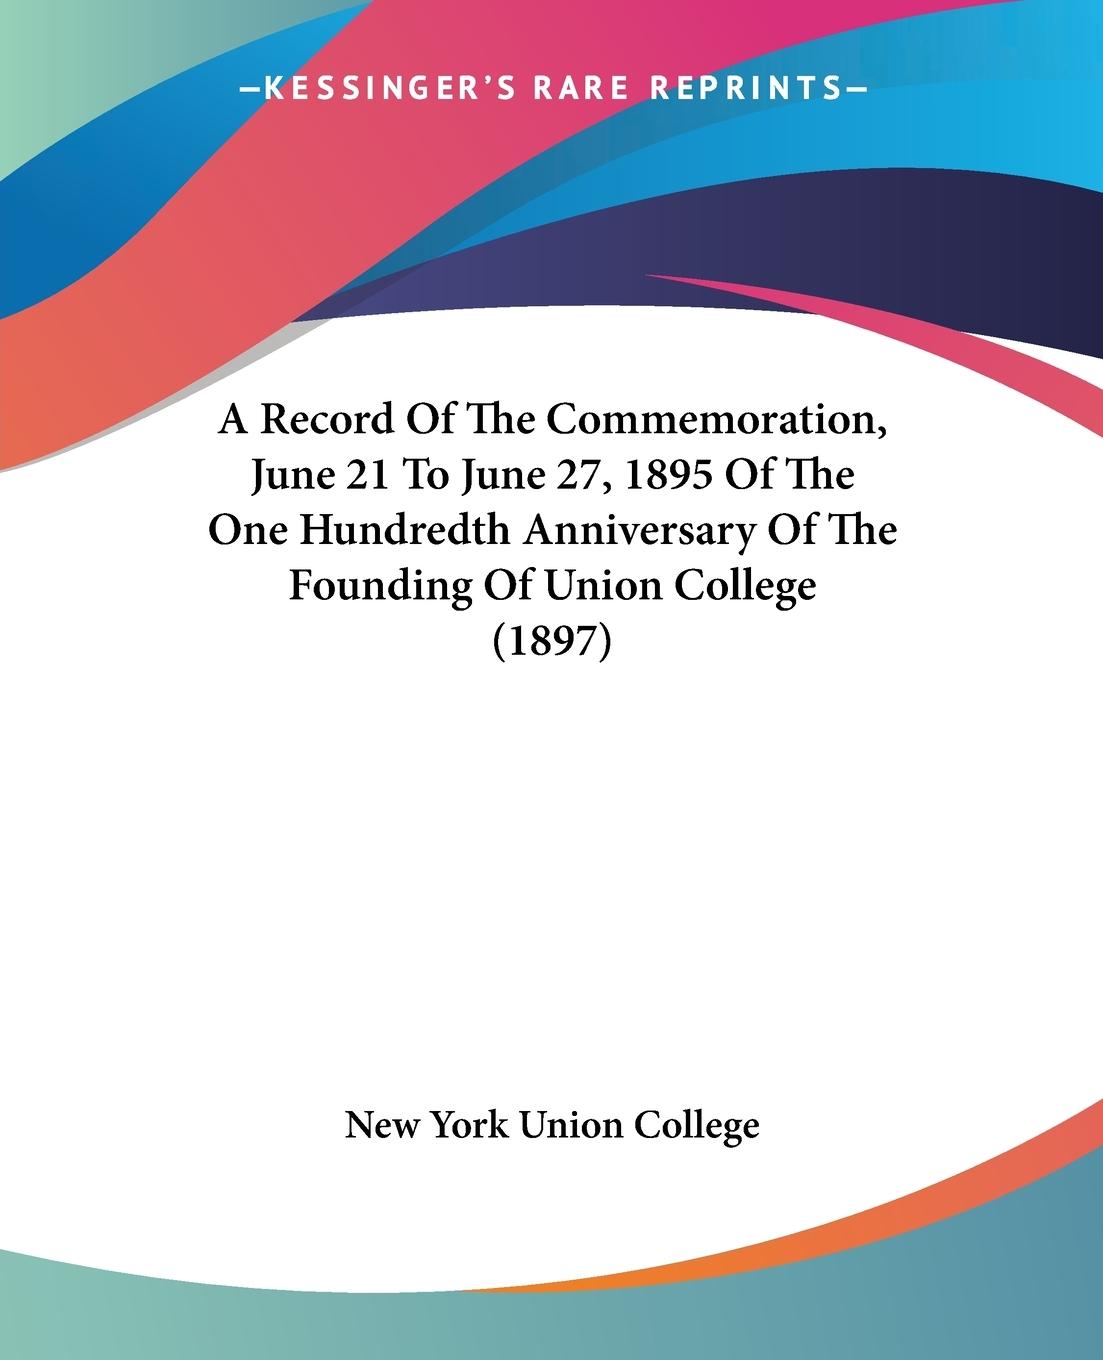 A Record Of The Commemoration, June 21 To June 27, 1895 Of The One Hundredth Anniversary Of The Founding Of Union College (1897) - New York Union College